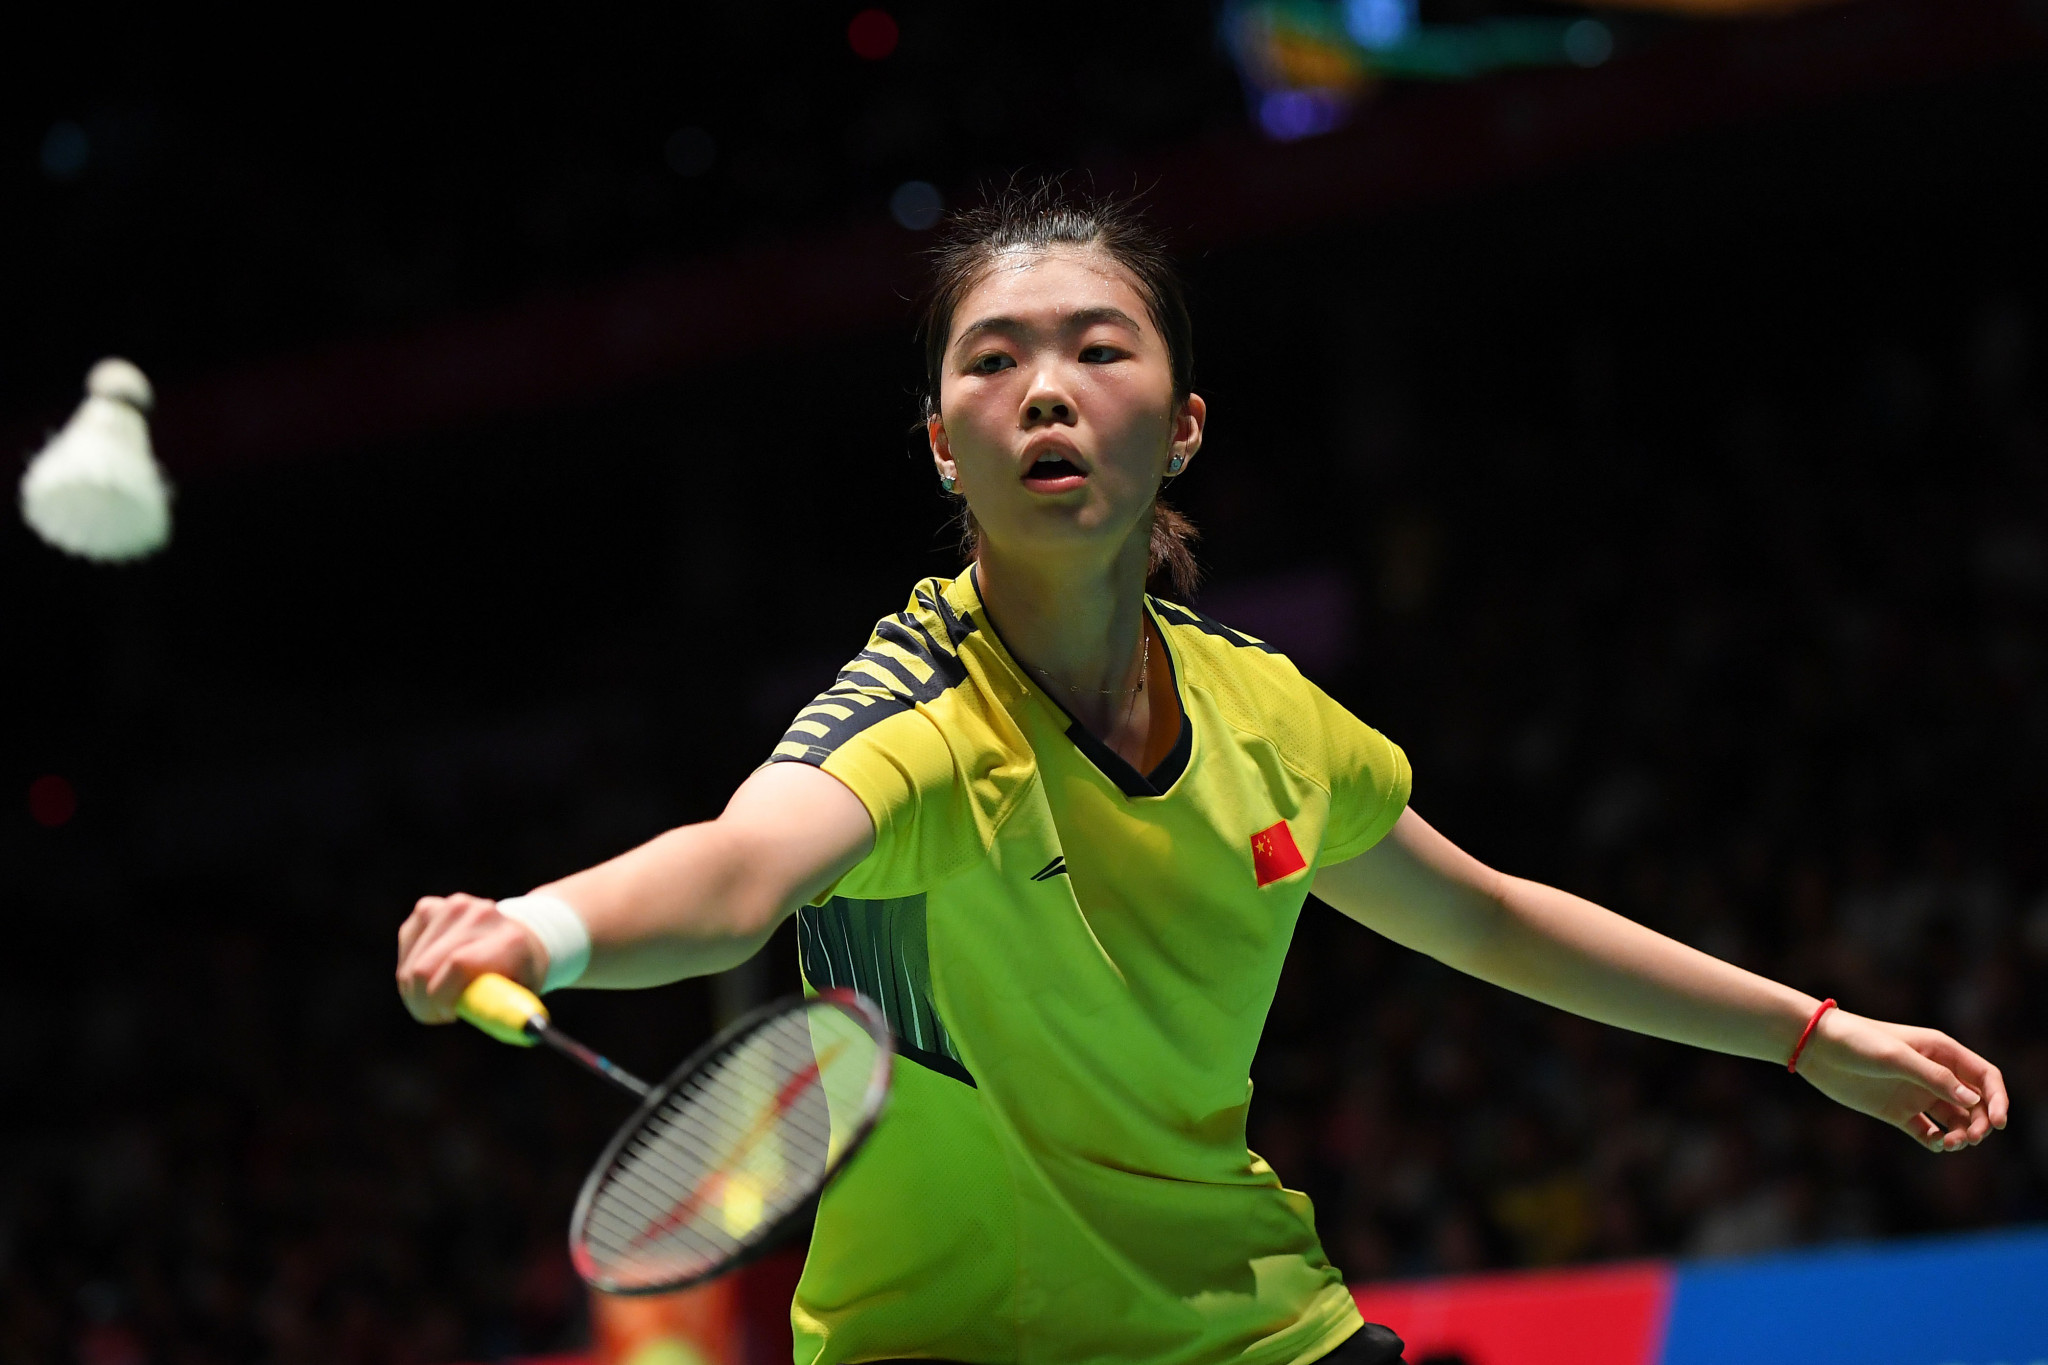 Gao Fangjie was part of the China team that won the Badminton Asia Mixed Team Championship title against South Korea ©Getty Images